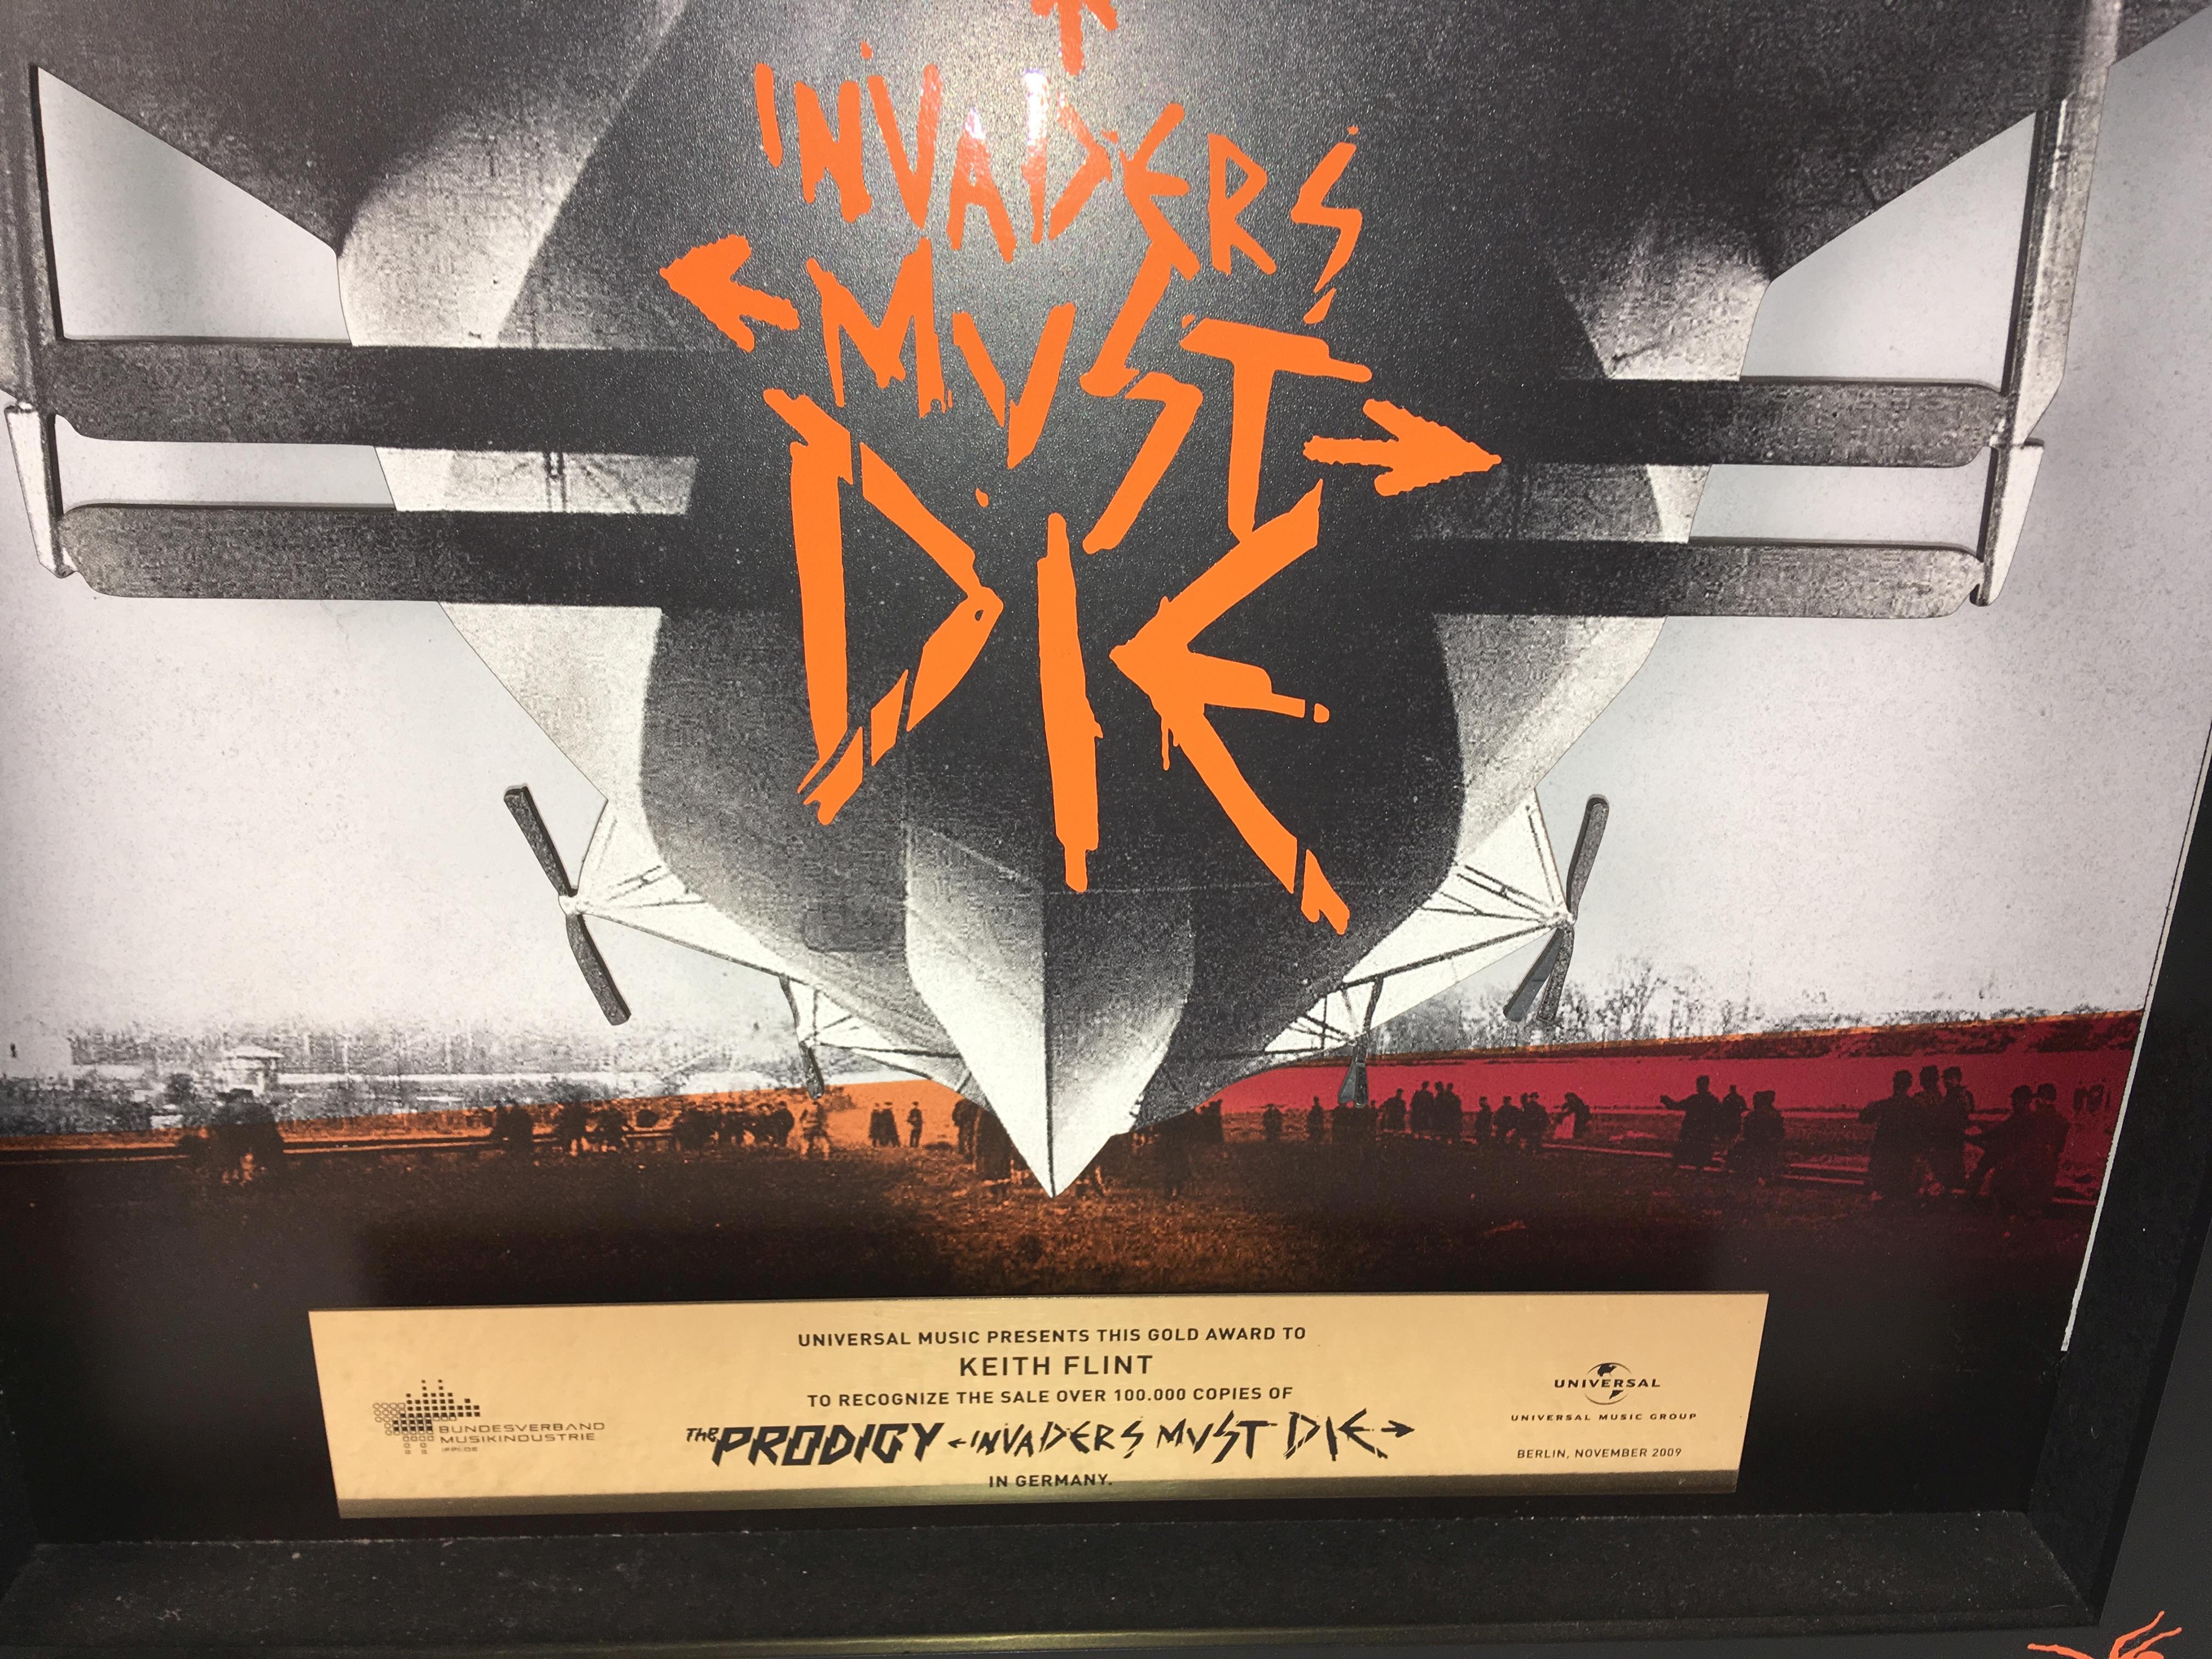 Invaders Must Die' 2009 a presentation gold disc to Keith Flint, to recognise sales in Germany of - Image 3 of 4